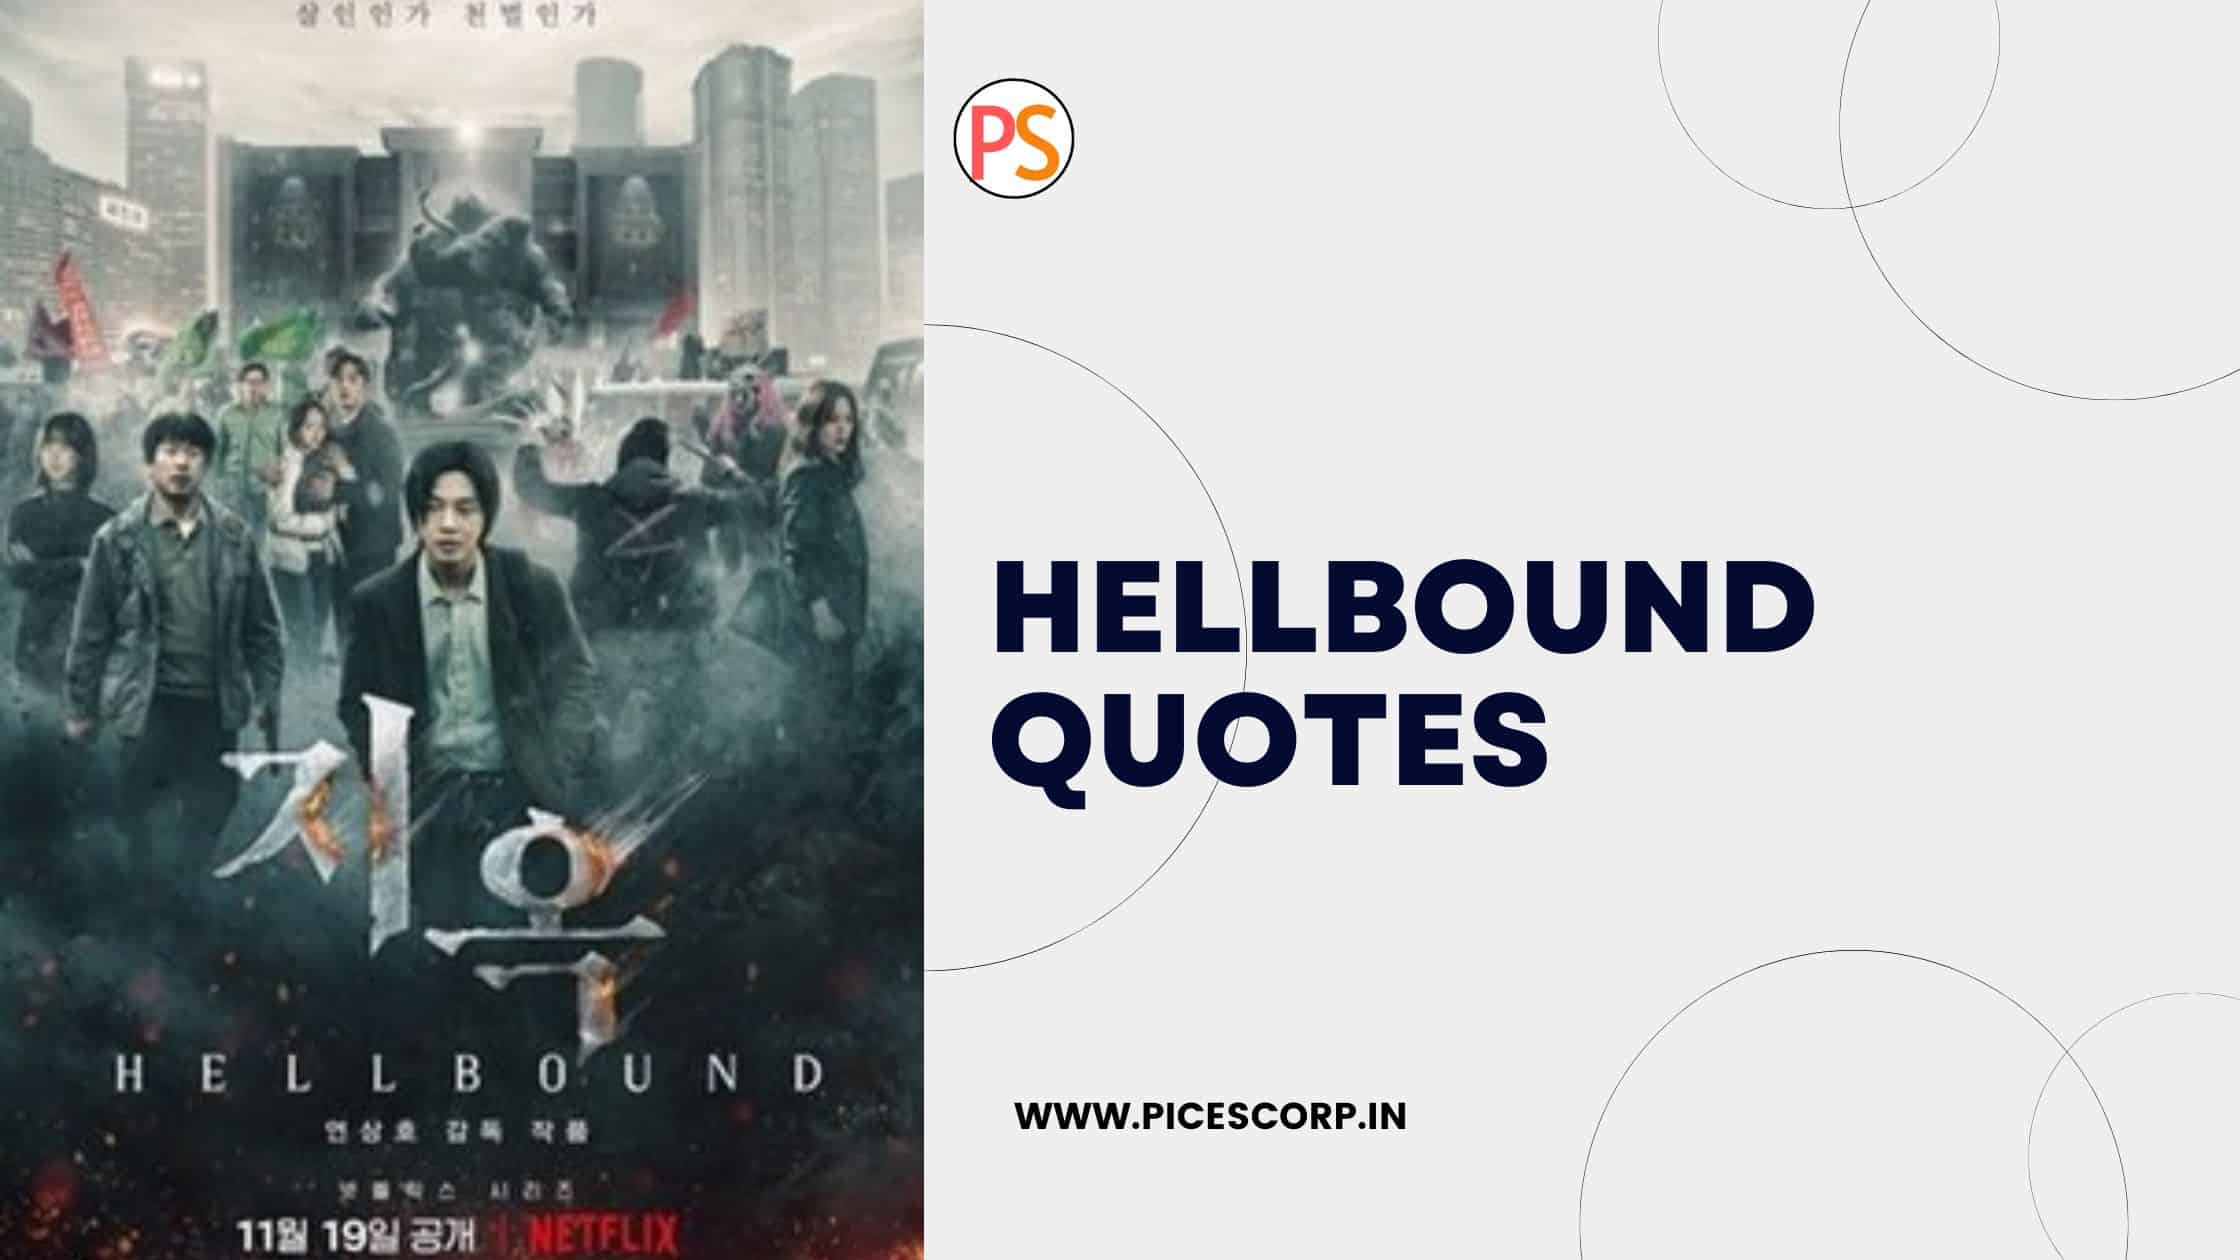 Hellbound Quotes